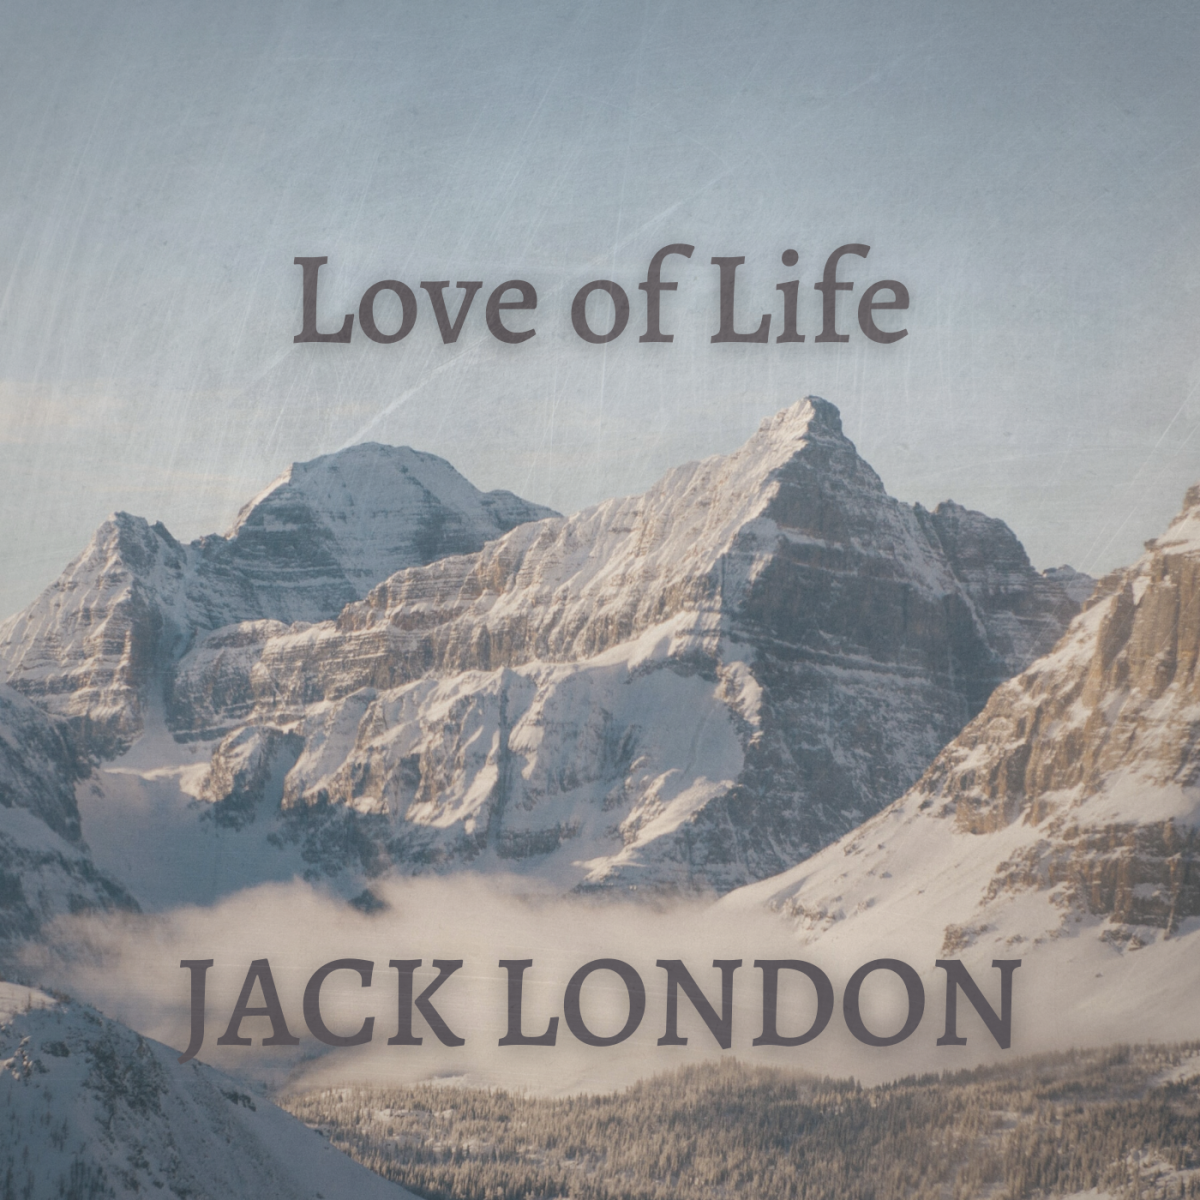 A review of the short story "Love of Life" by Jack London. 